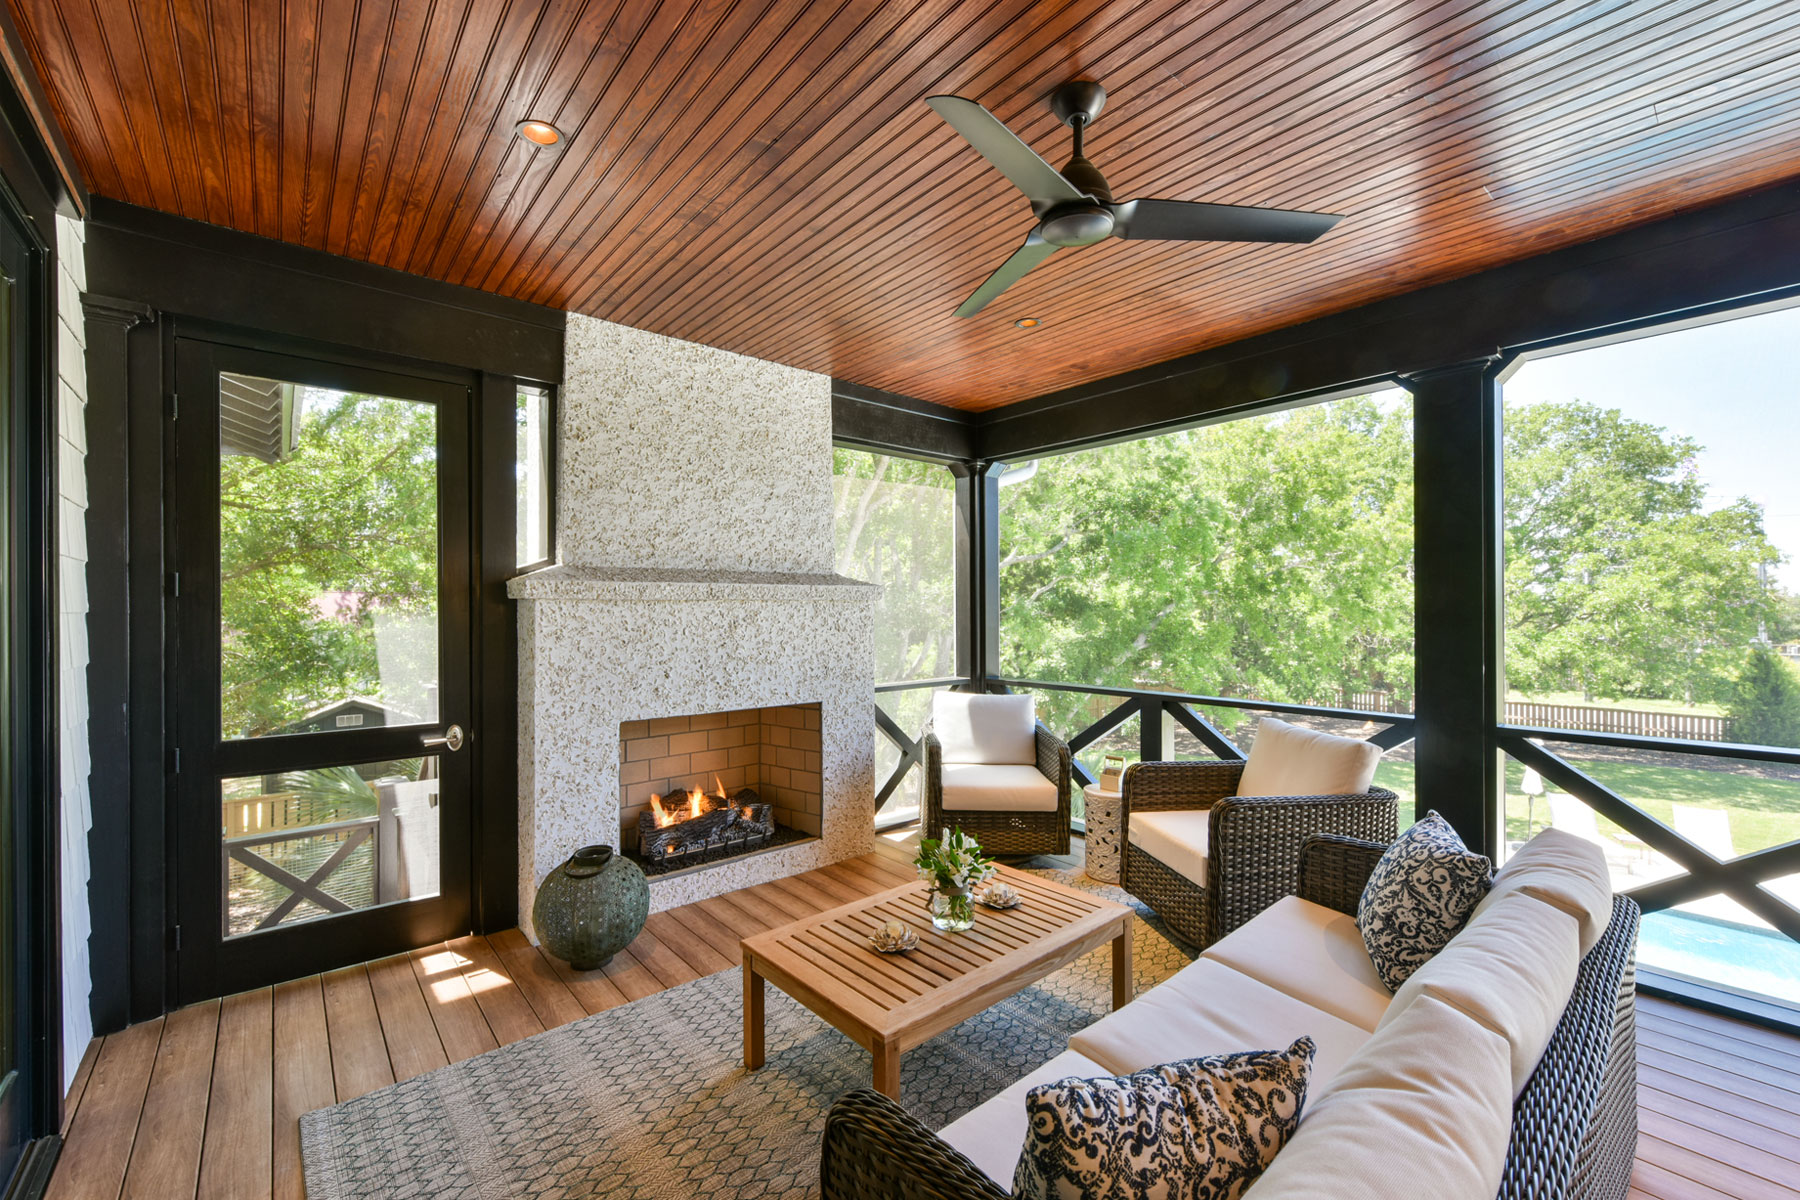 Tabby covered fireplace on screened porch